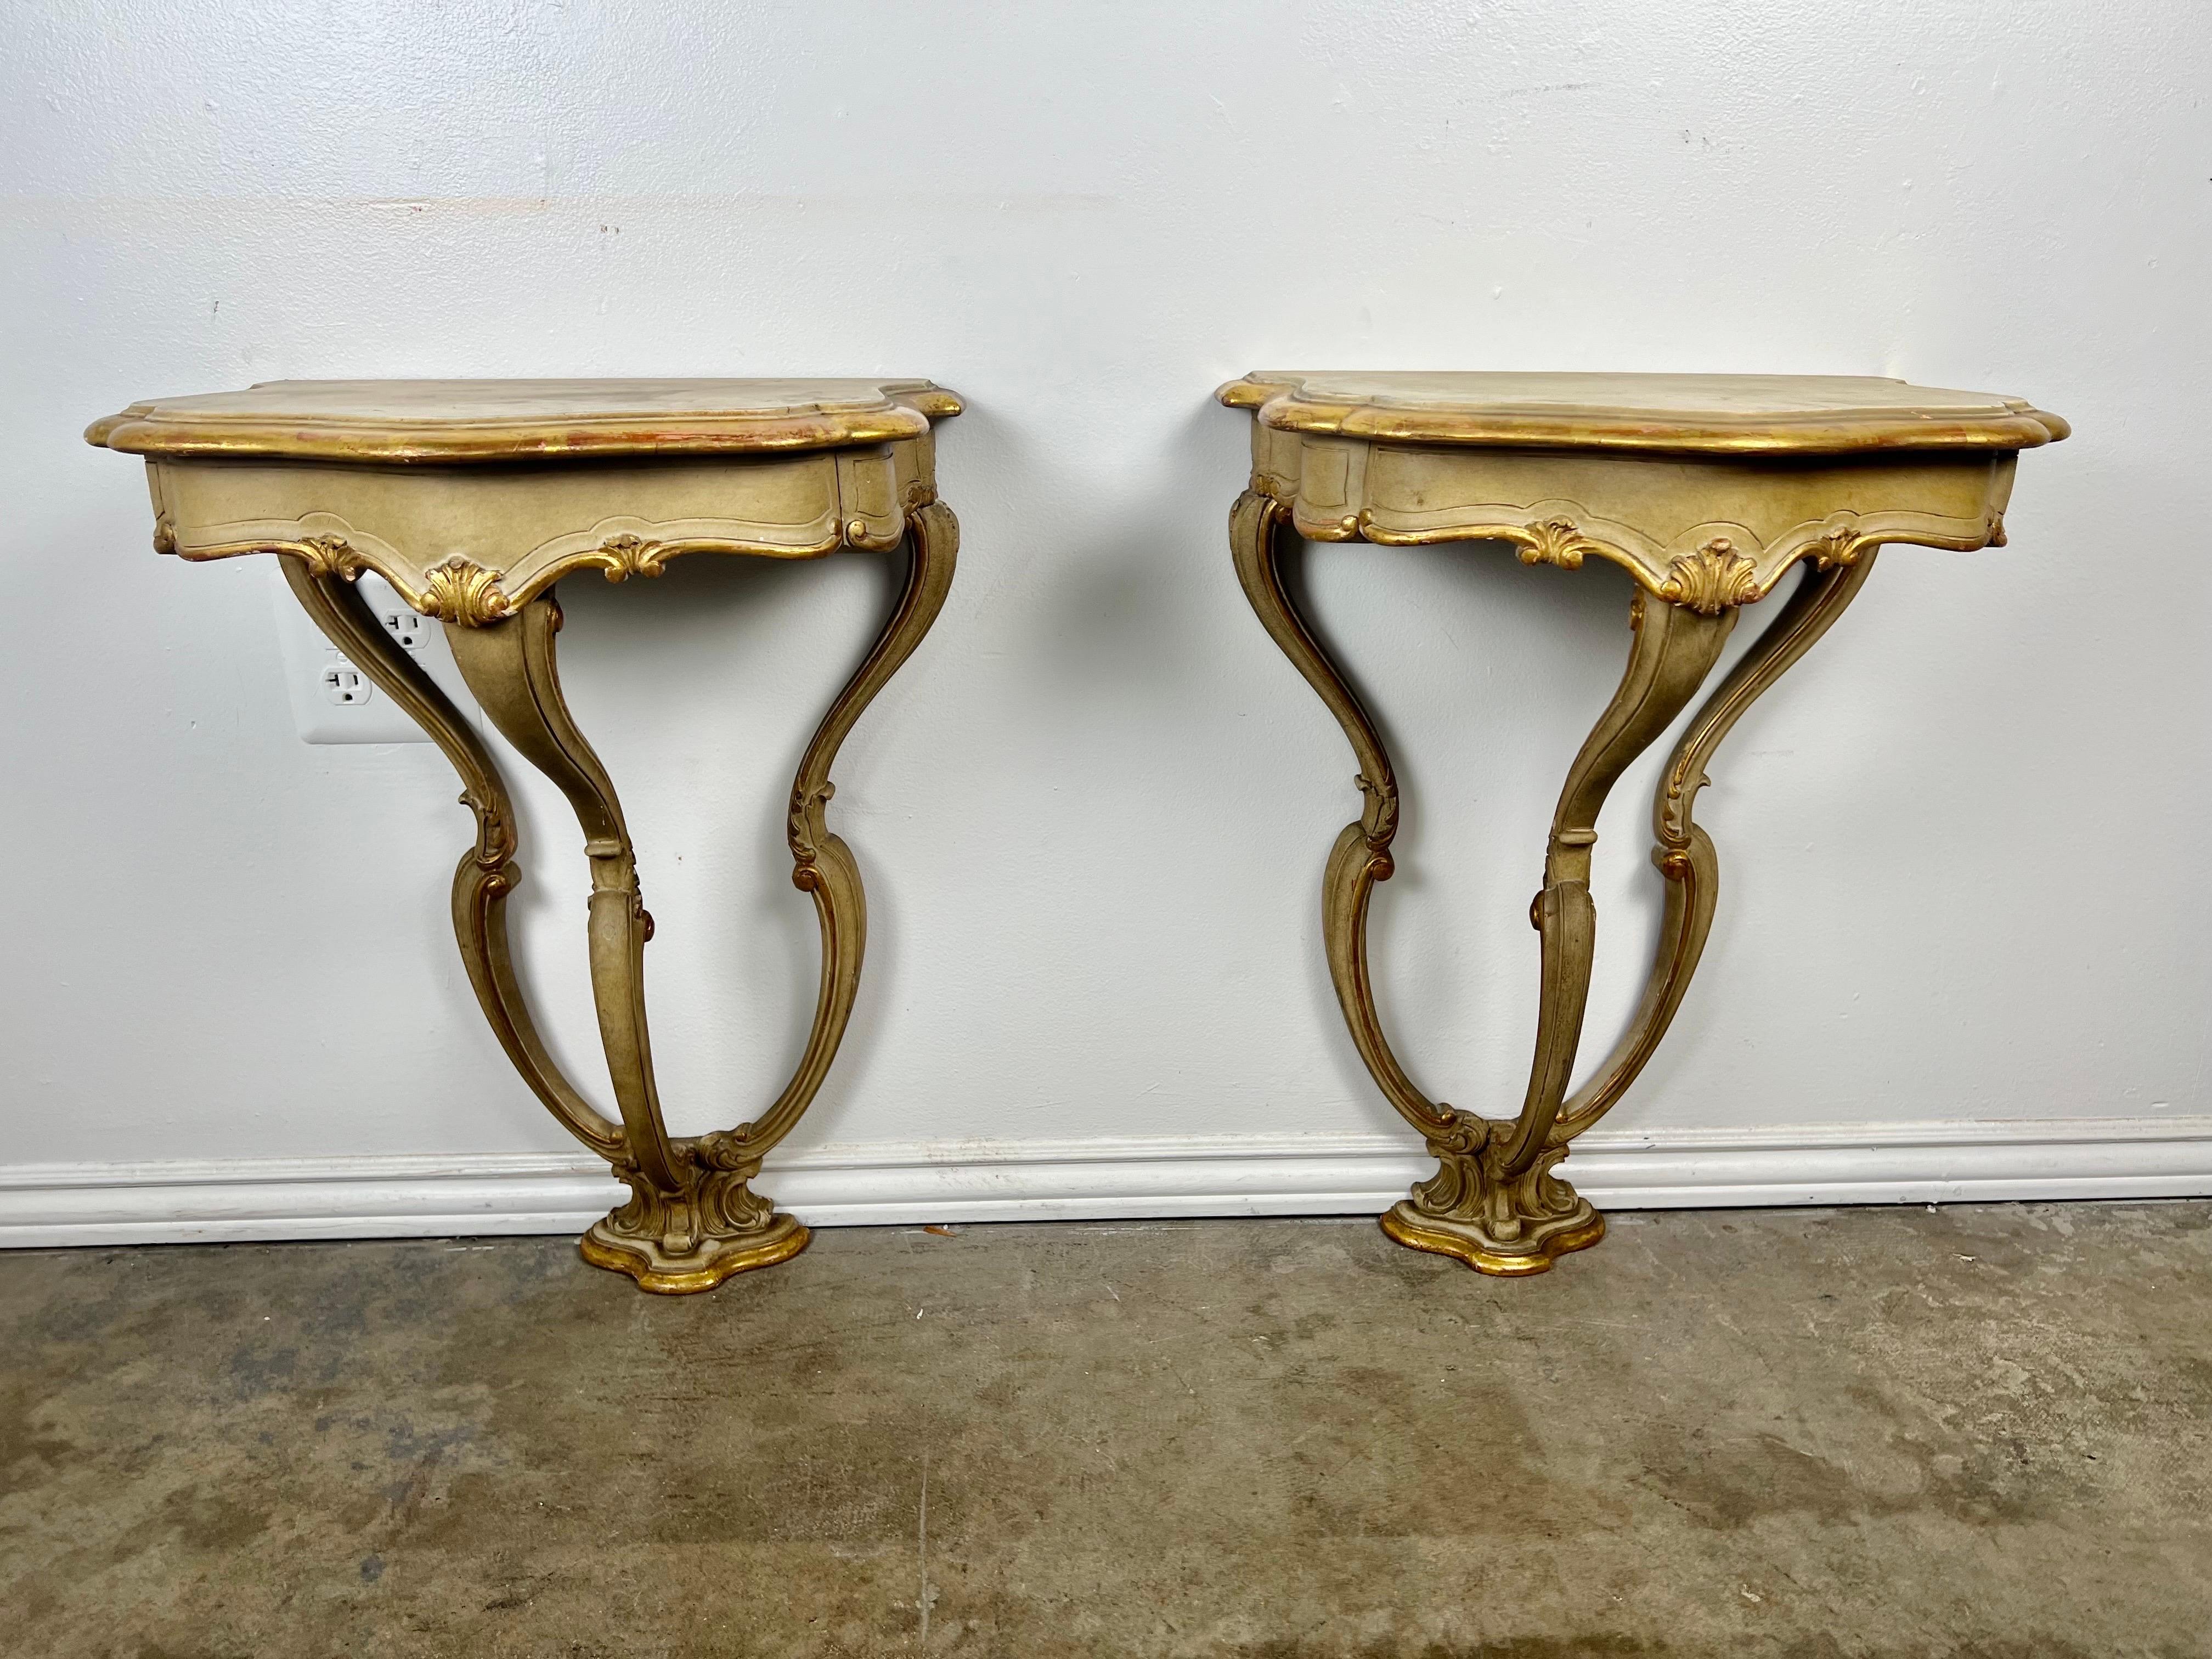 Pair of Italian painted & parcel gilt carved console with a serpentine shaped worn top.  The consoles have a nice shape with a tripod base that meets at the base of the table.  Gold leaf carved acanthus leaves throughout.  The consoles have drawers